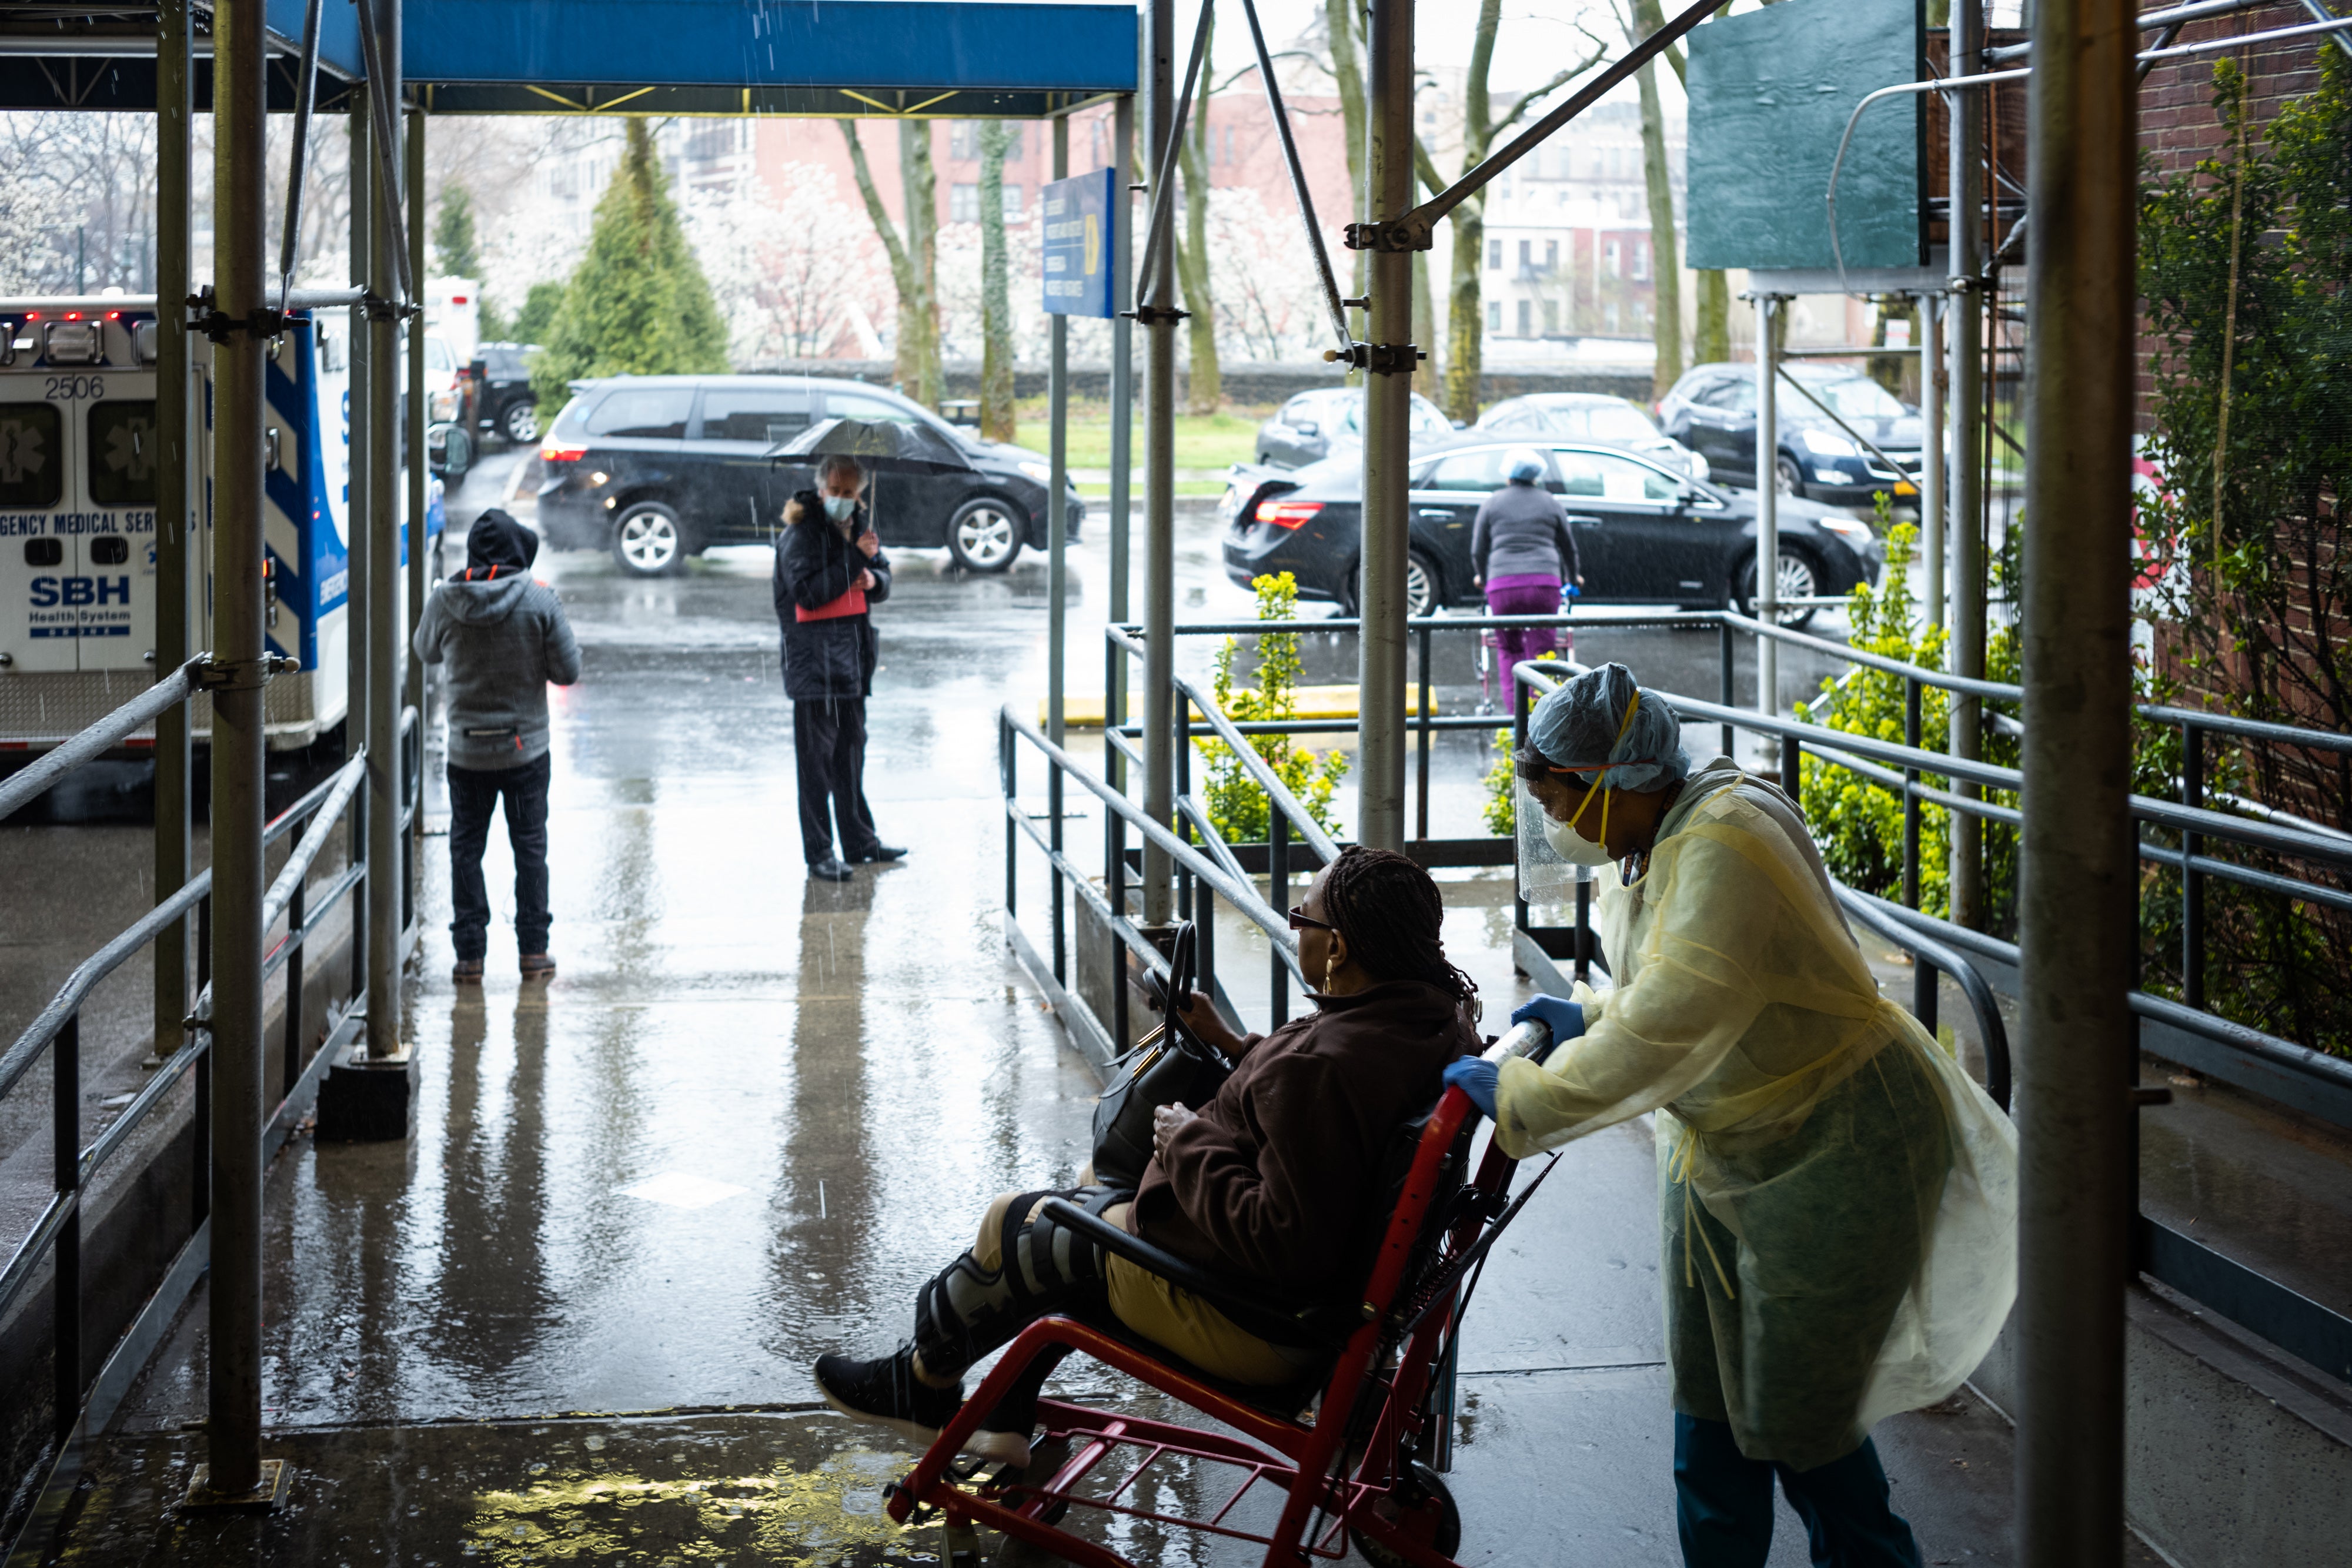 A staff member pushes a patient in a wheelchair at St Barnabas Hospital on 23 March, 2020 in the Bronx borough of New York City.